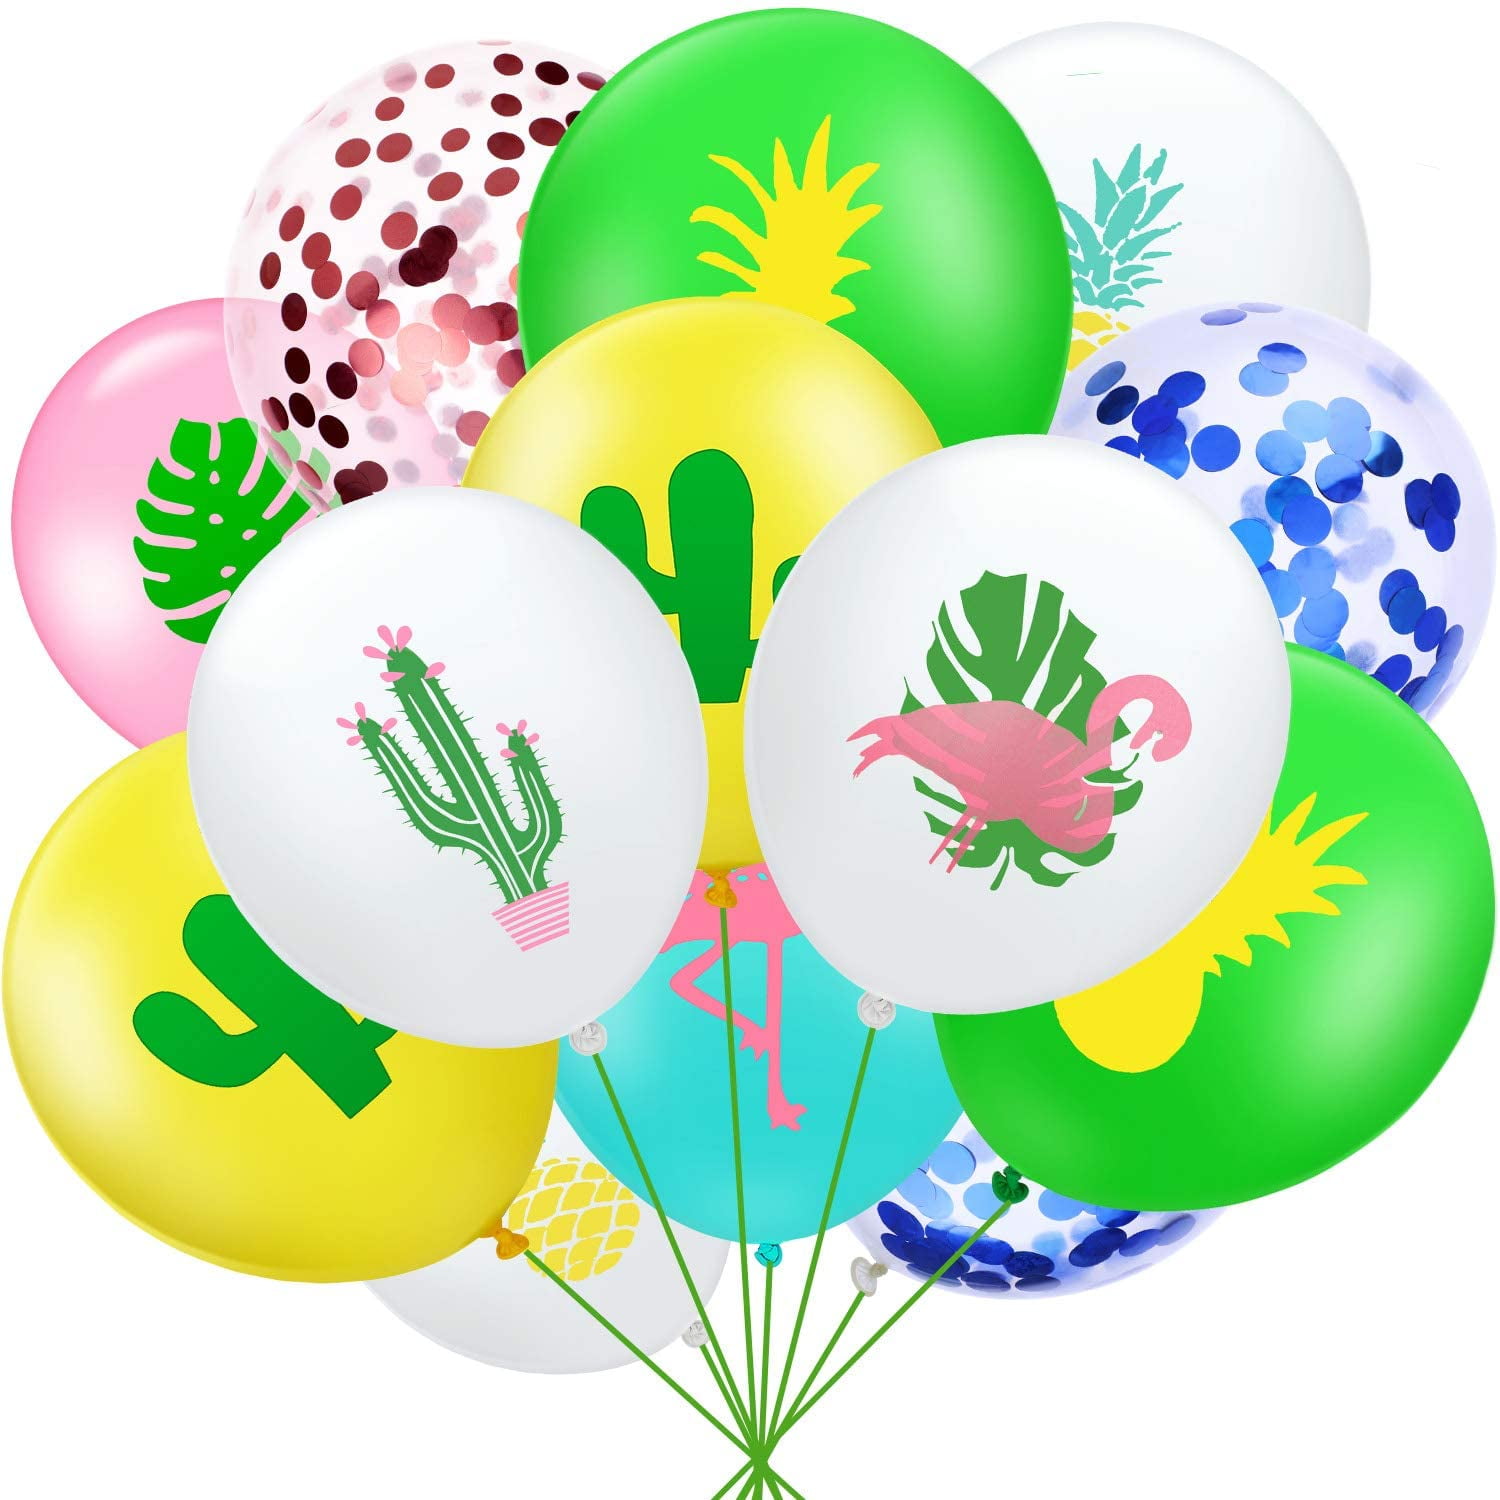 SATINIOR Set of 45 Hawaii Party Balloon Flamingo Tropical Leaf Pineapple Balloons Colorful Balloon with Round Confetti for Hawaii Luau Party Decorations